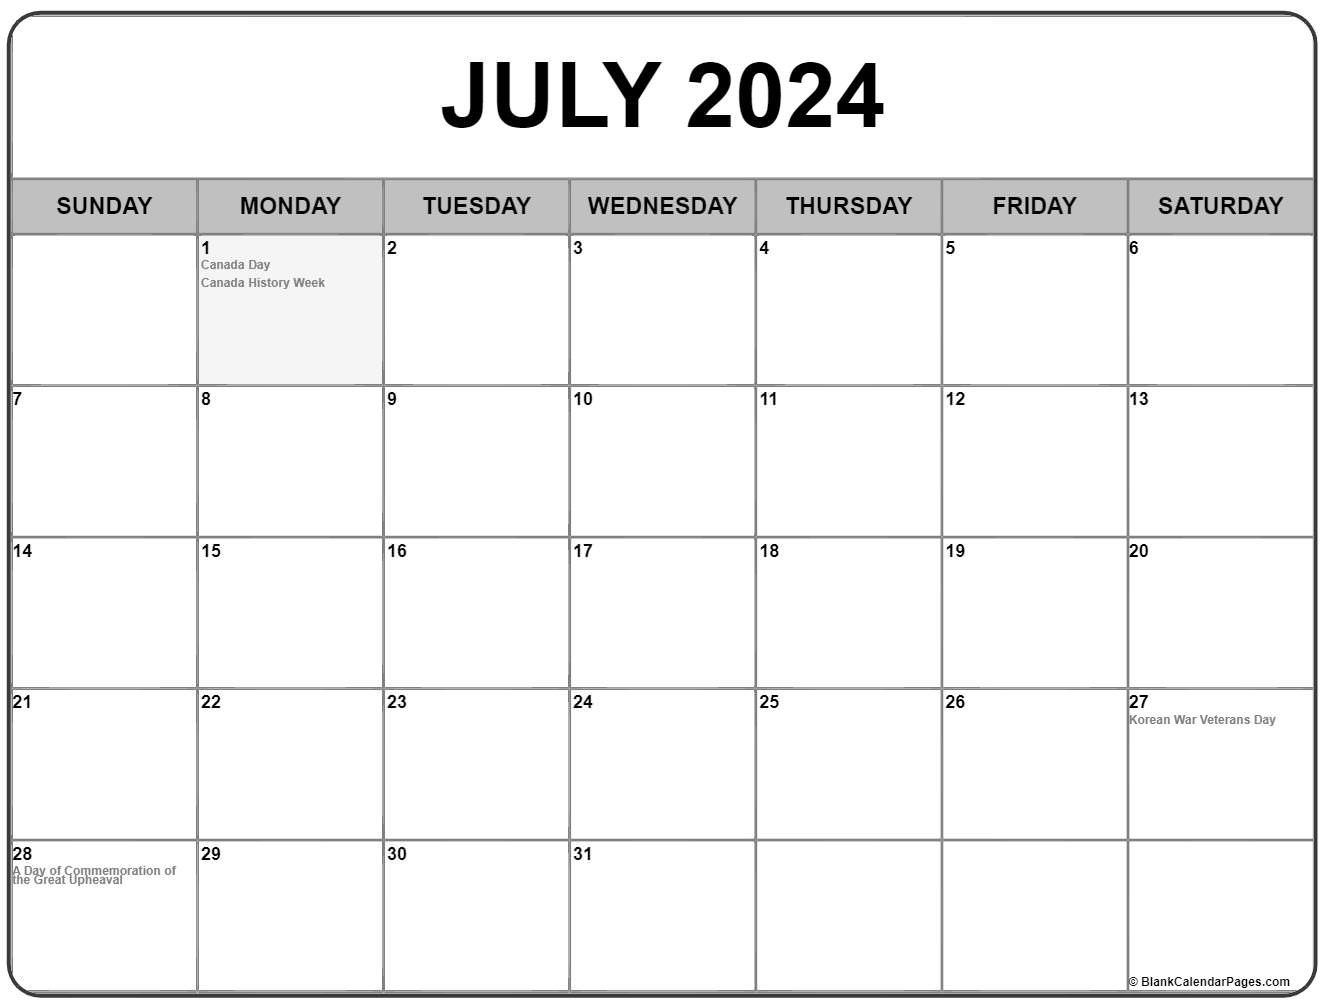 Collection of July 2020 calendars with holidays